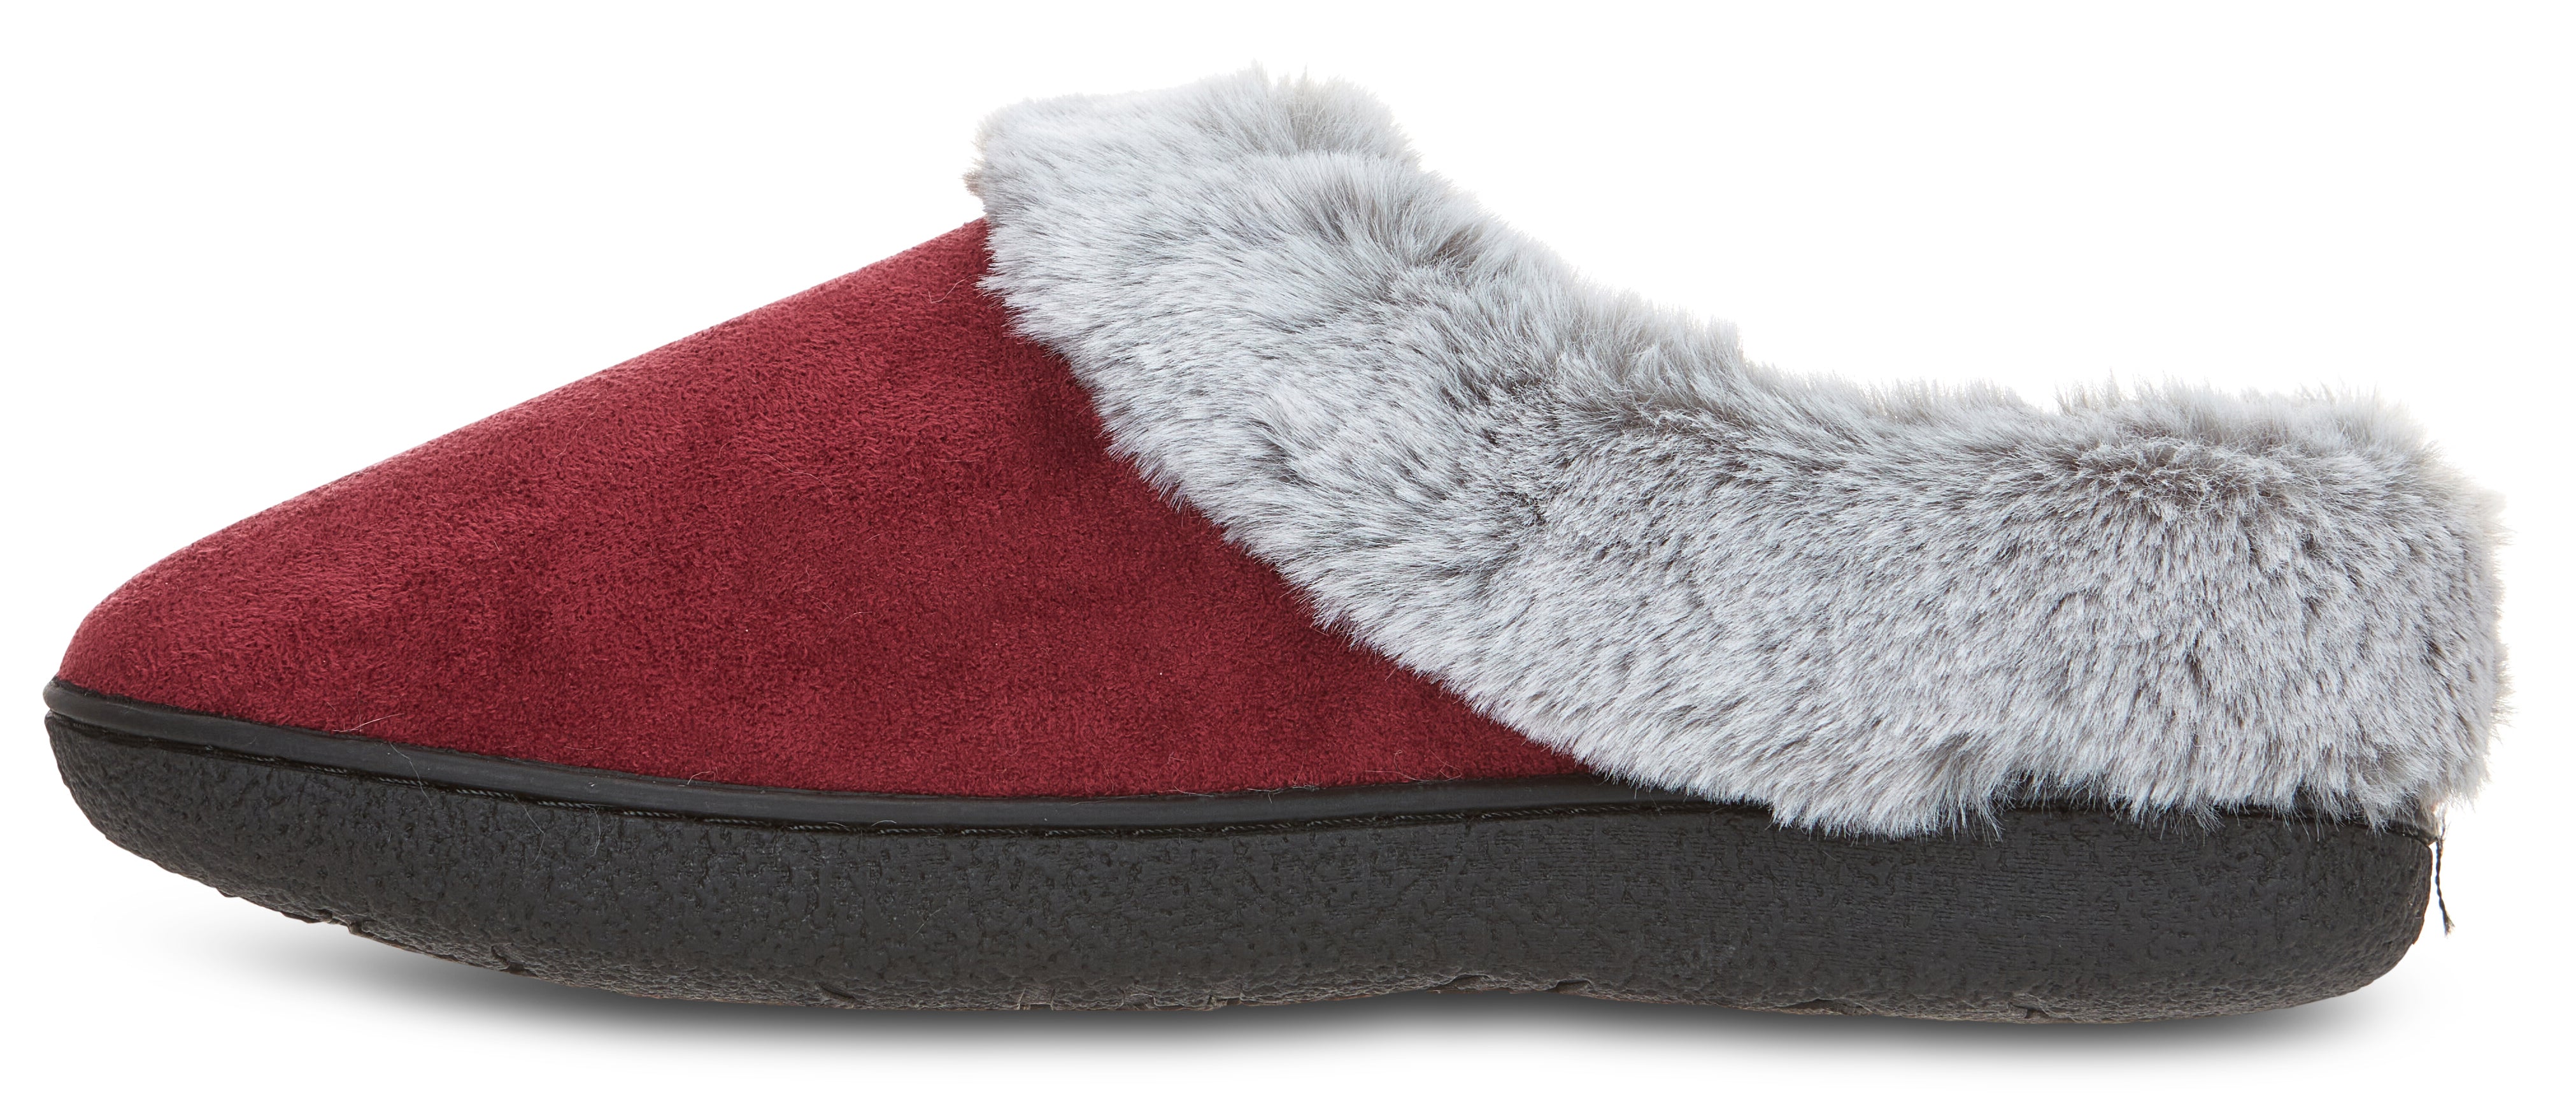 Womens Soft Classic Indoor/Outdoor Two-Tone Faux Fur Clog Slipper - Burgundy